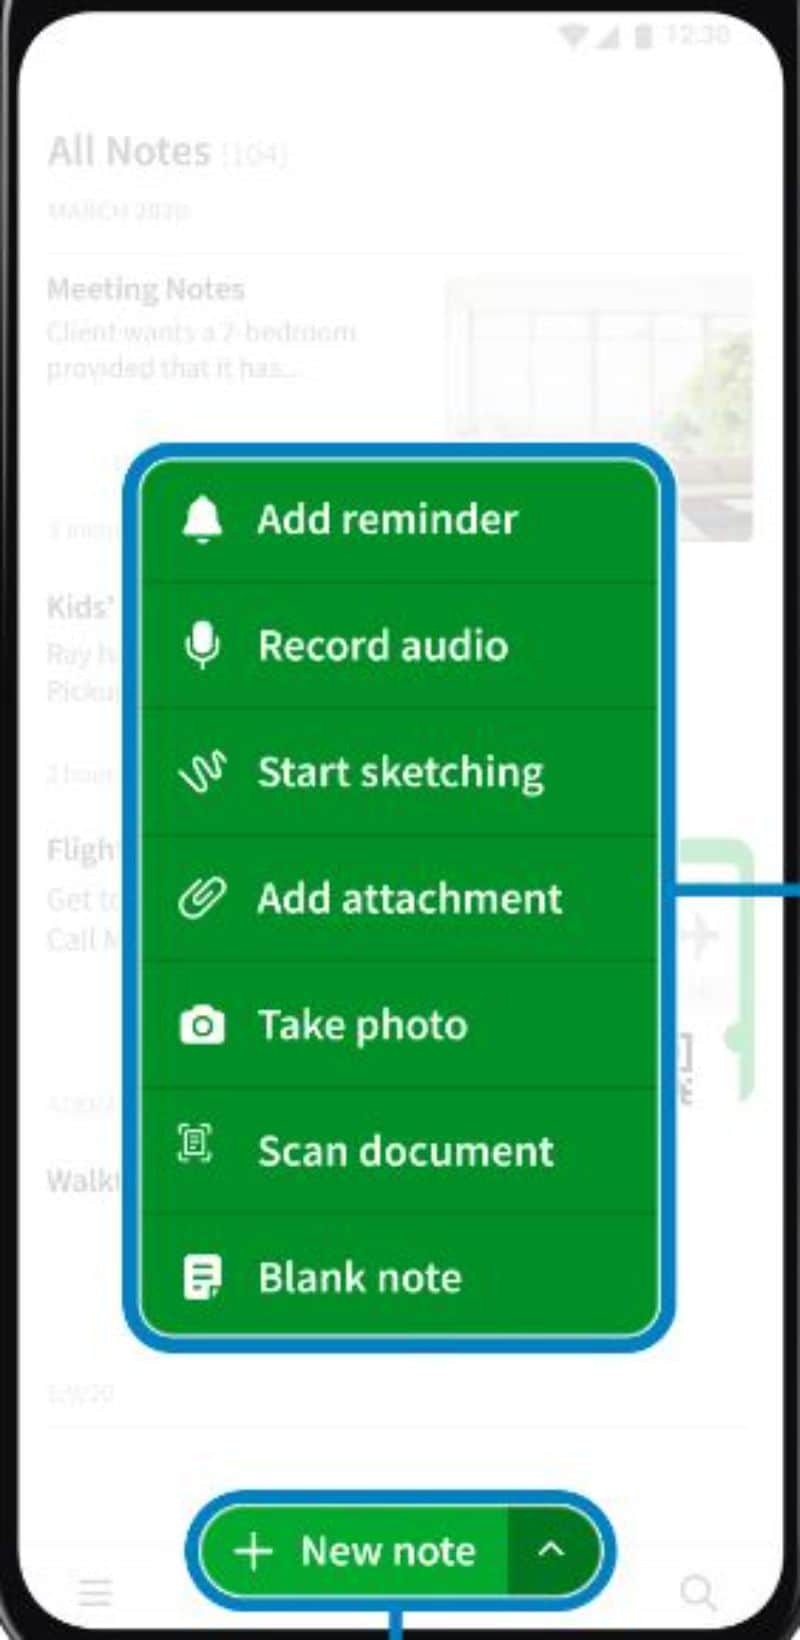 evernote user interface